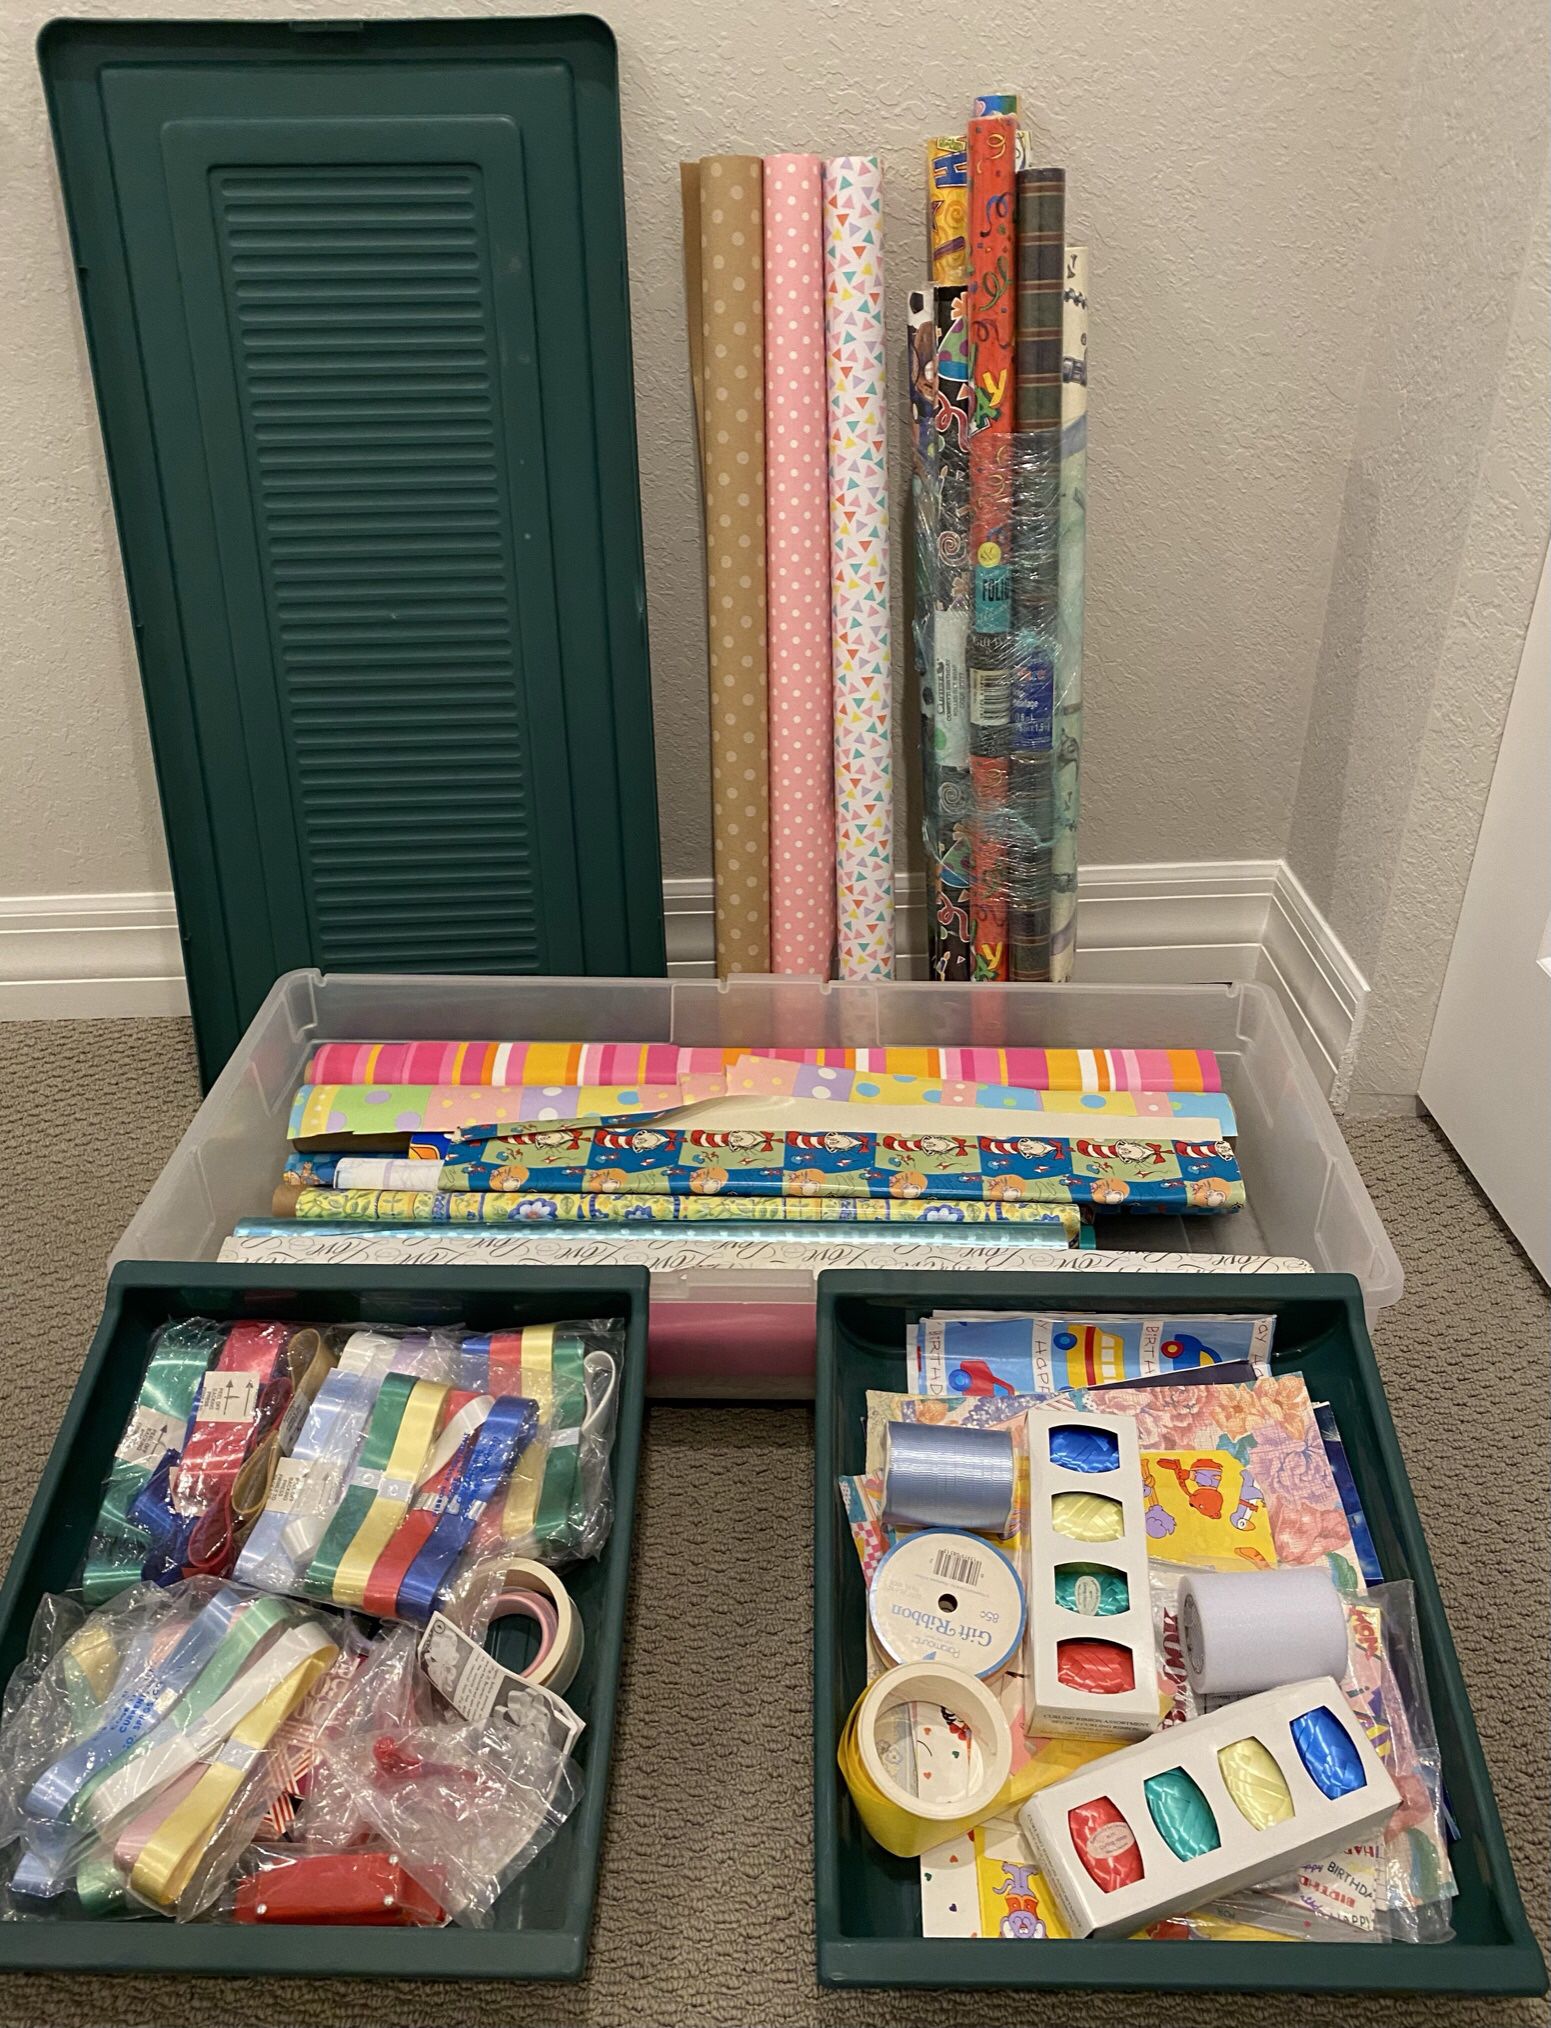 Rubbermaid wrapping paper storage Container…Includes all items shown for your wrapping needs!!! $35